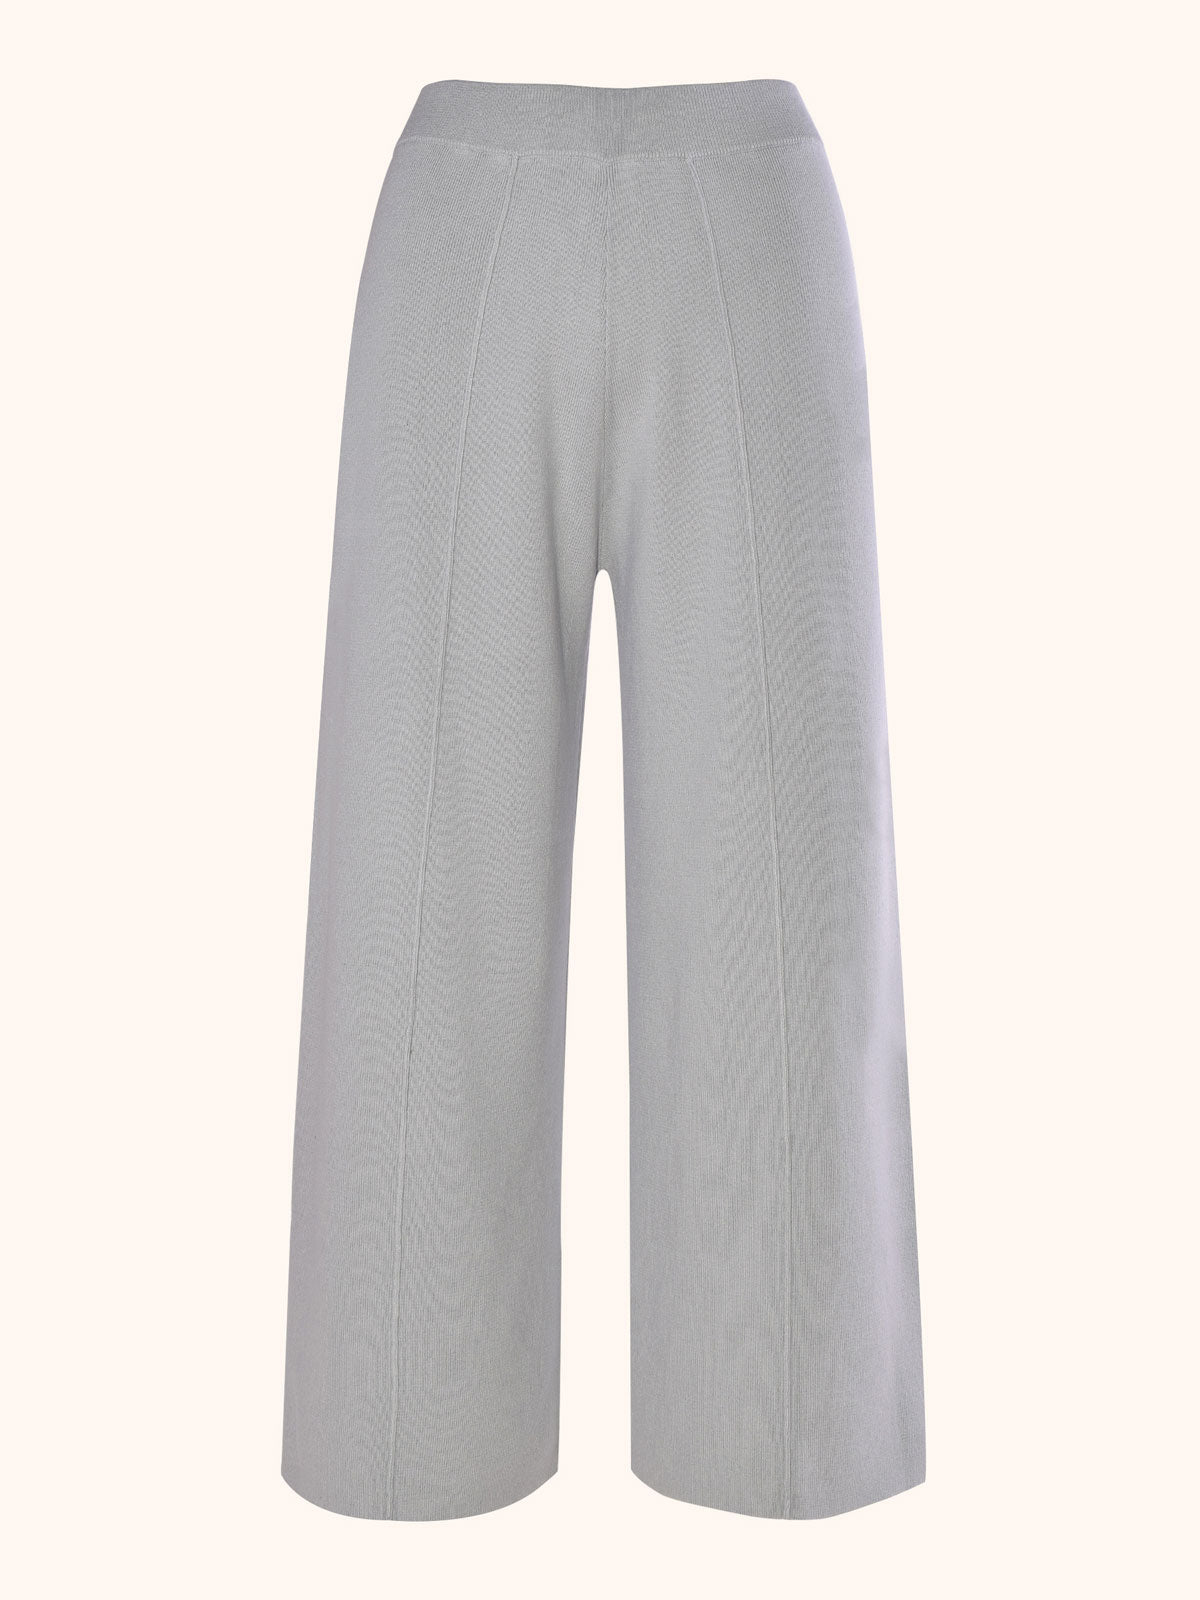 Women's Organic Cotton Knit Pants. Shop Online Now with Free NZ Shipping